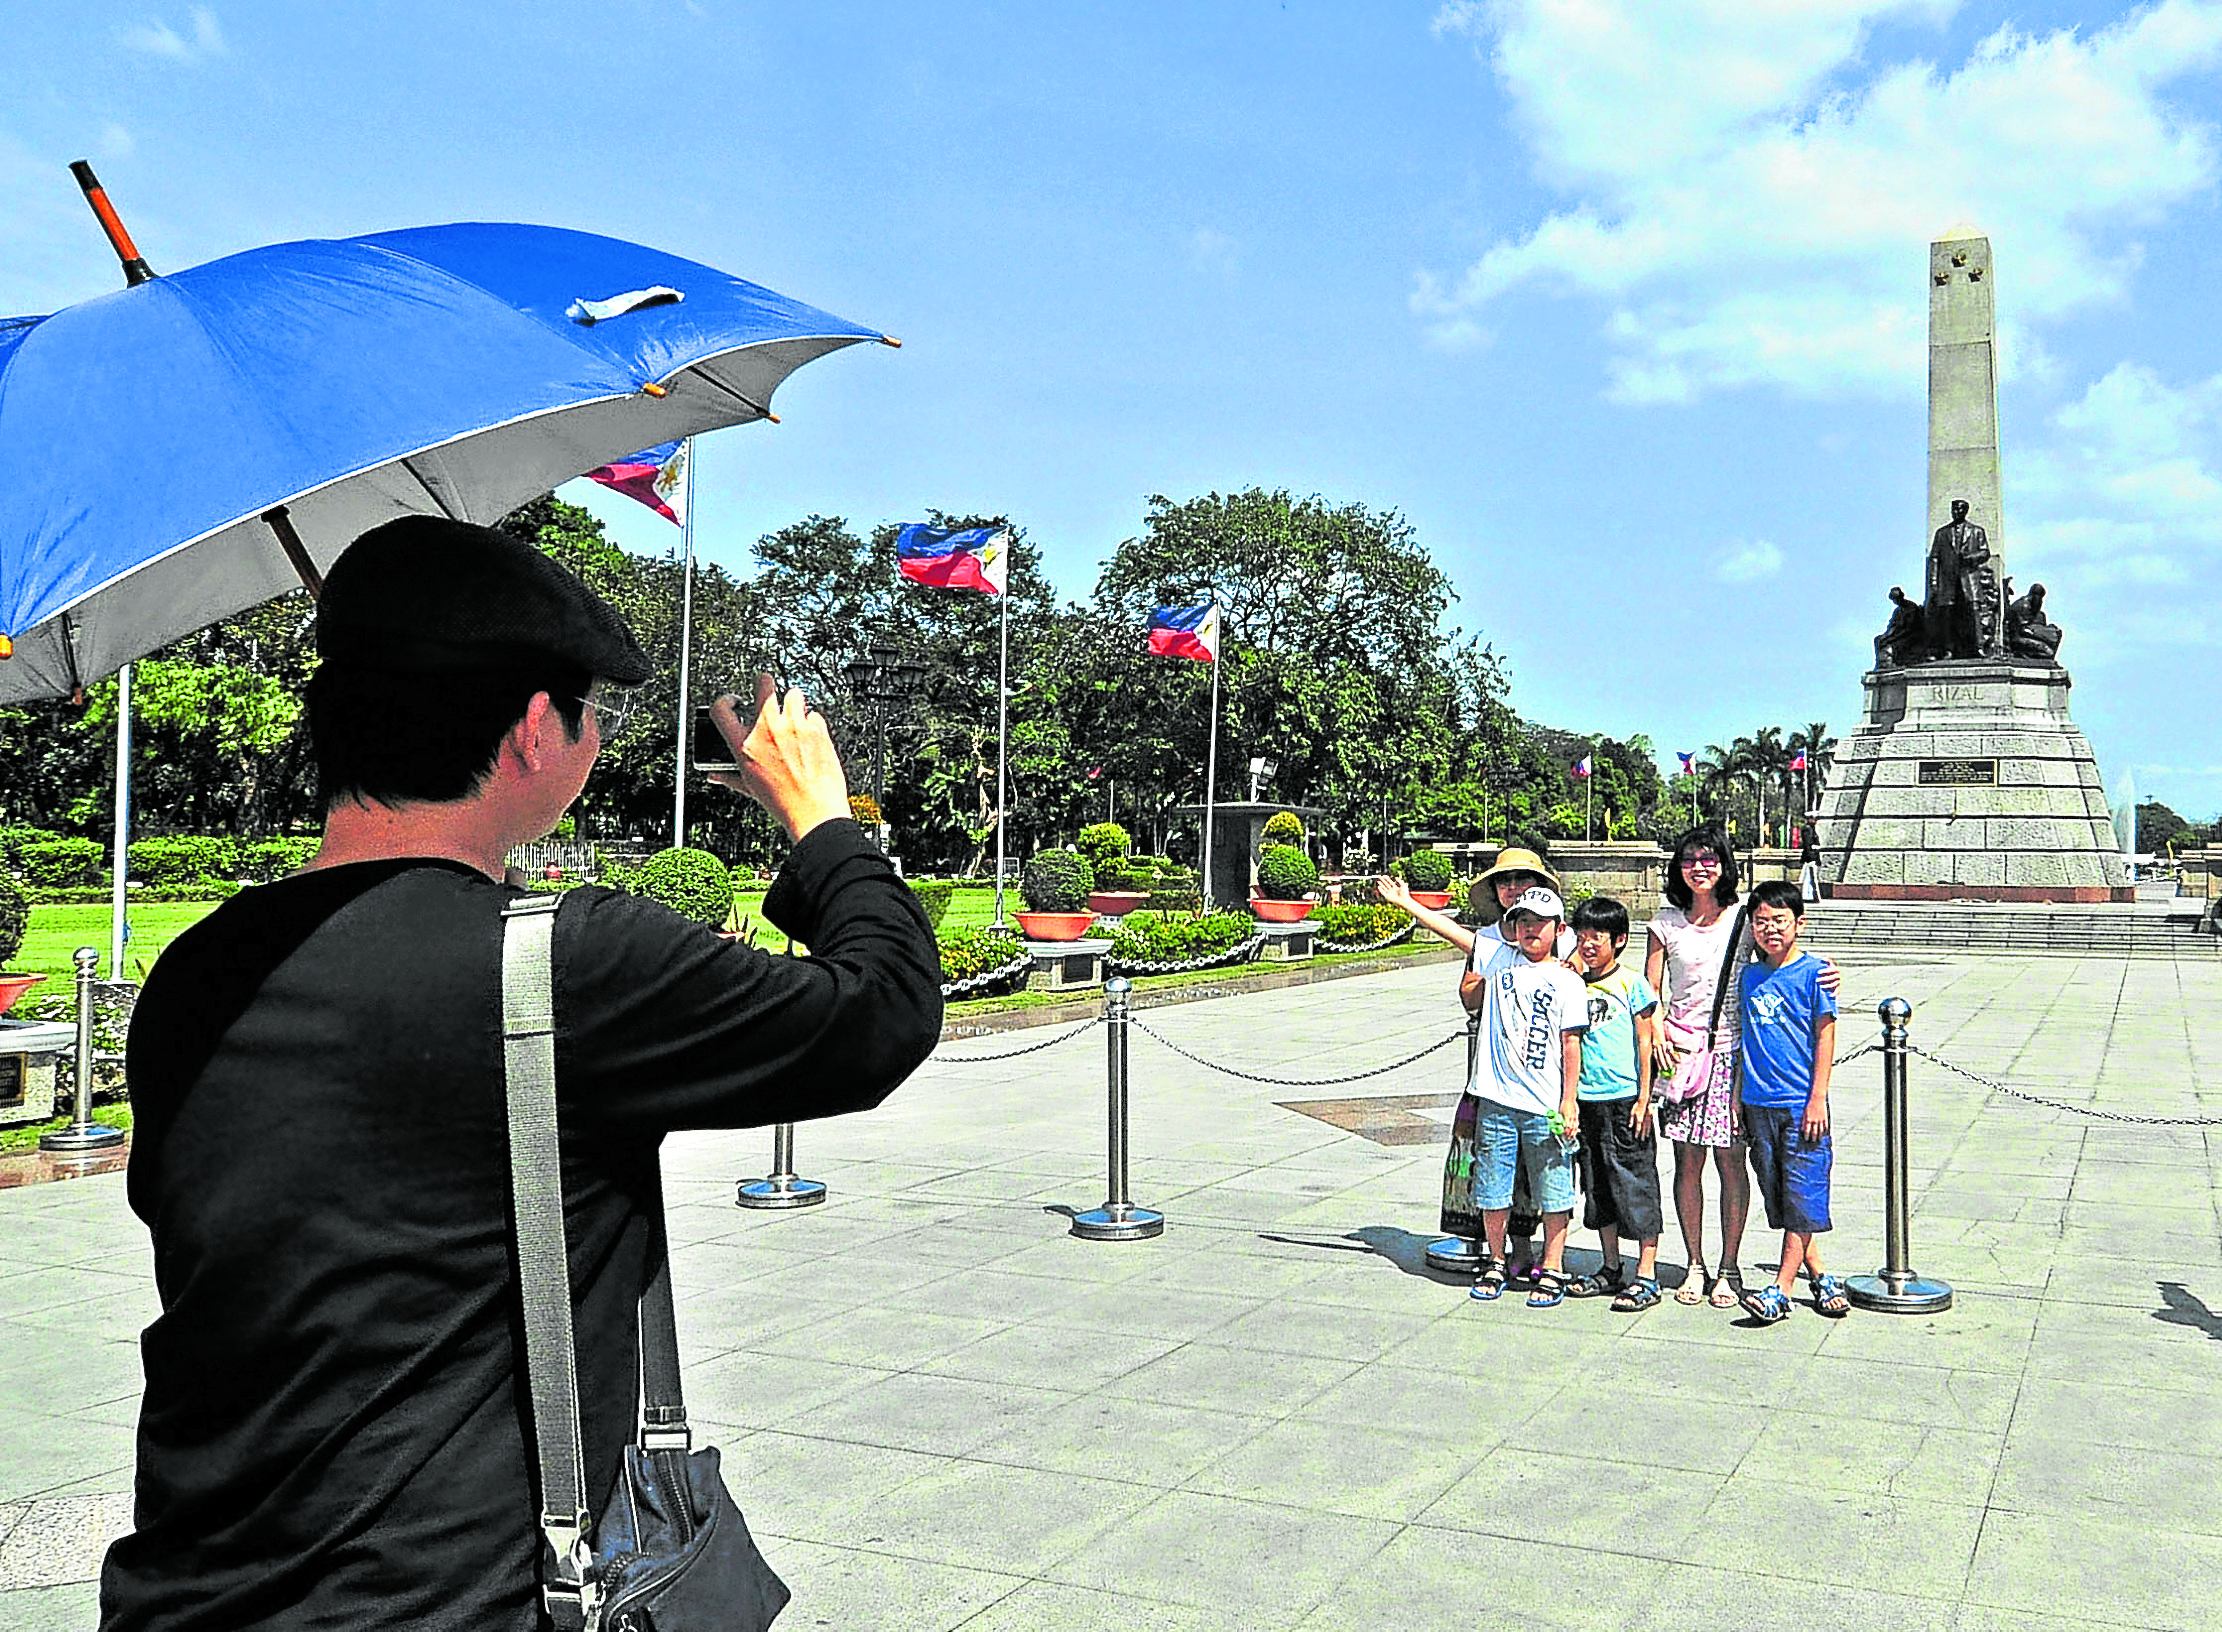 DOT: 1 in every 4 foreign tourists in PH from S. Korea